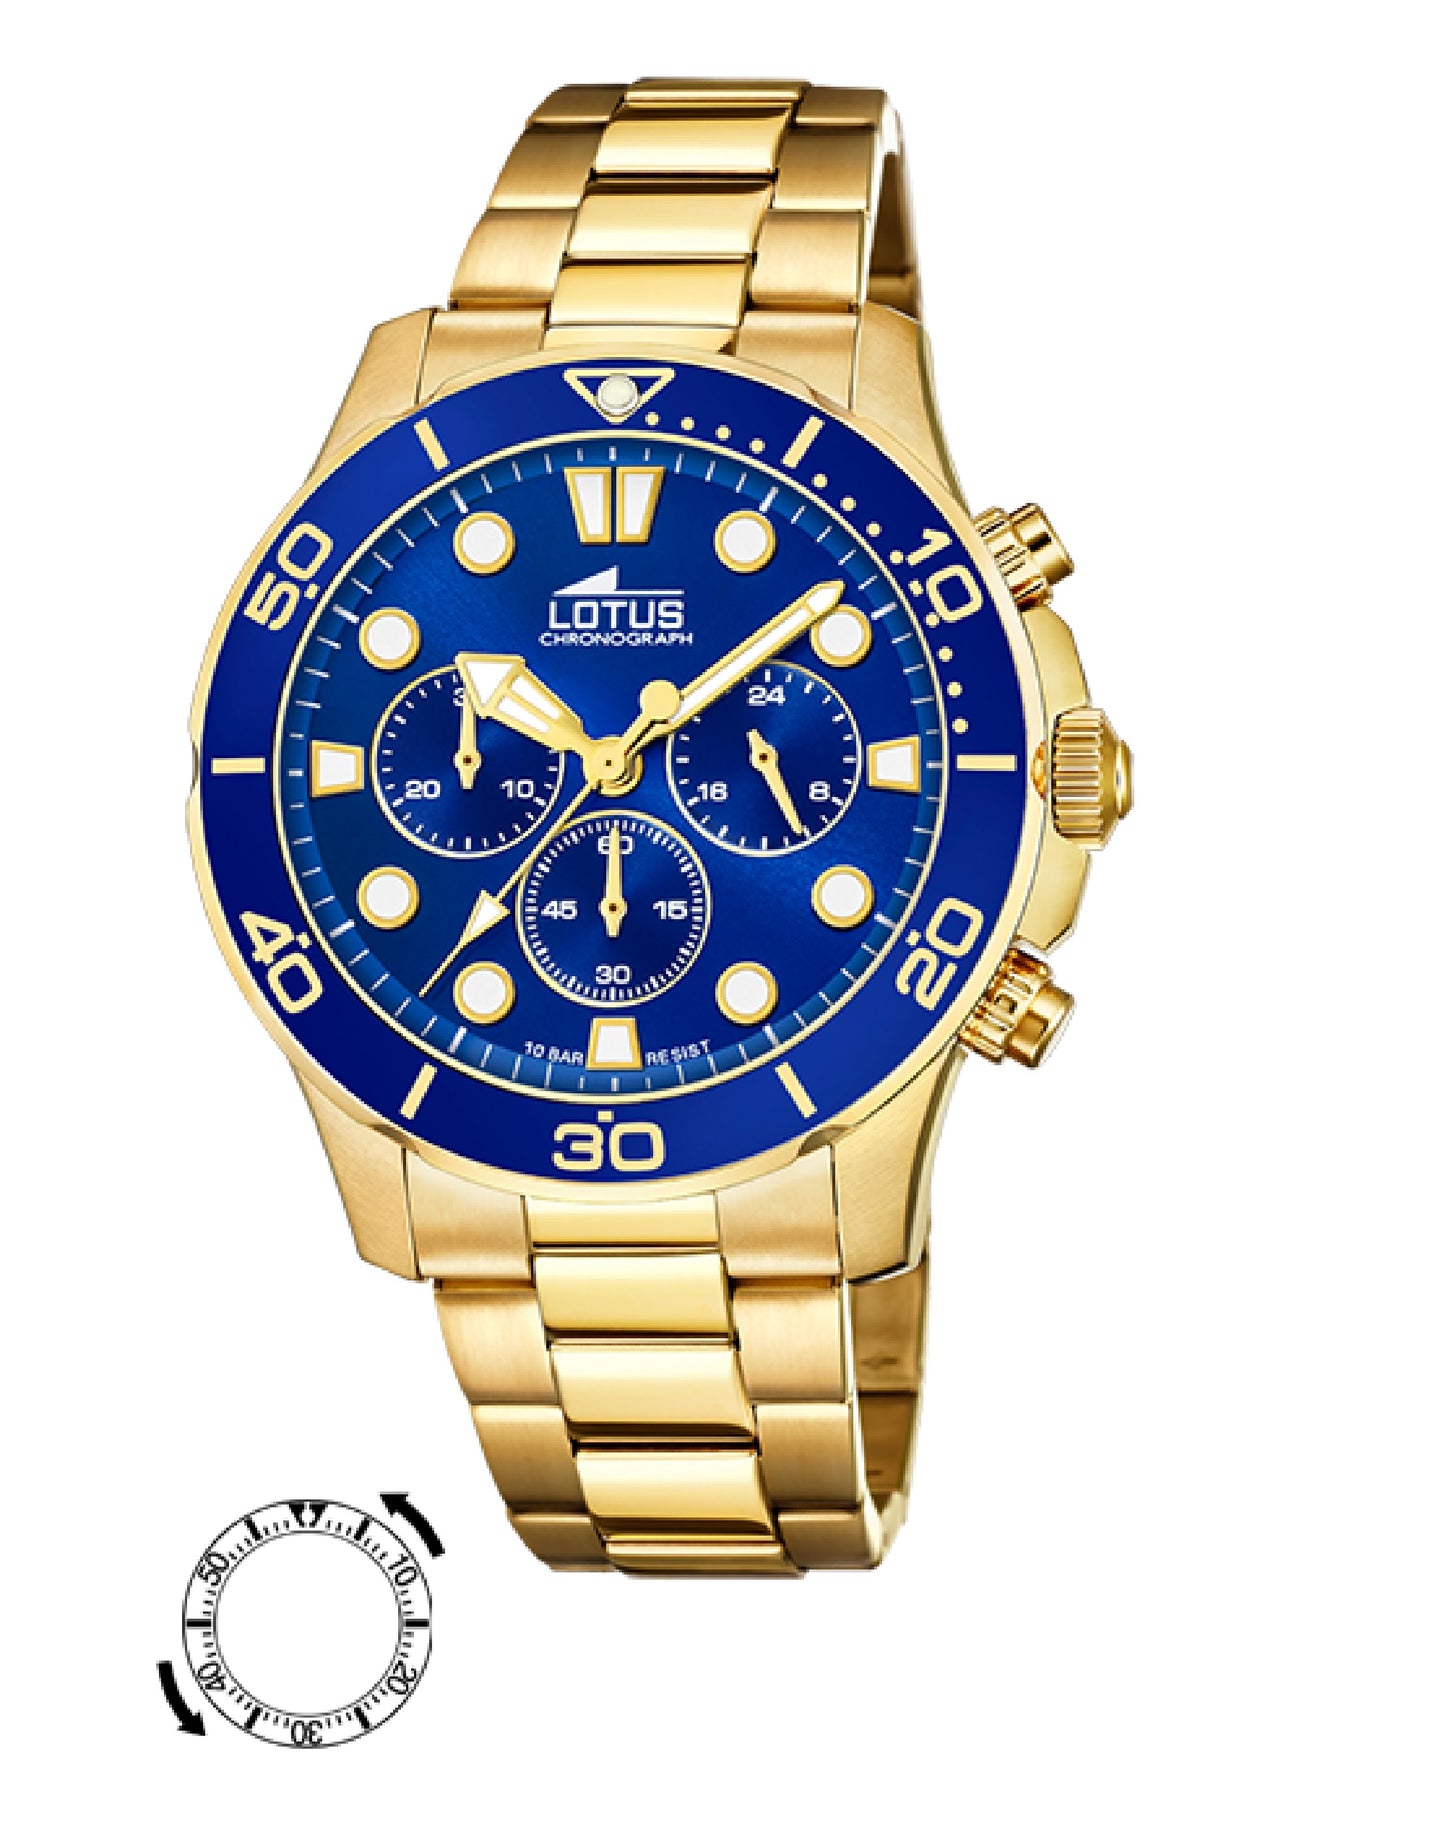 PLATED Diamonds 18757/1Lotus YELLOW DIAL WITH Diamonds – 44.50MM N GOLD & STRAP BLUE CASE